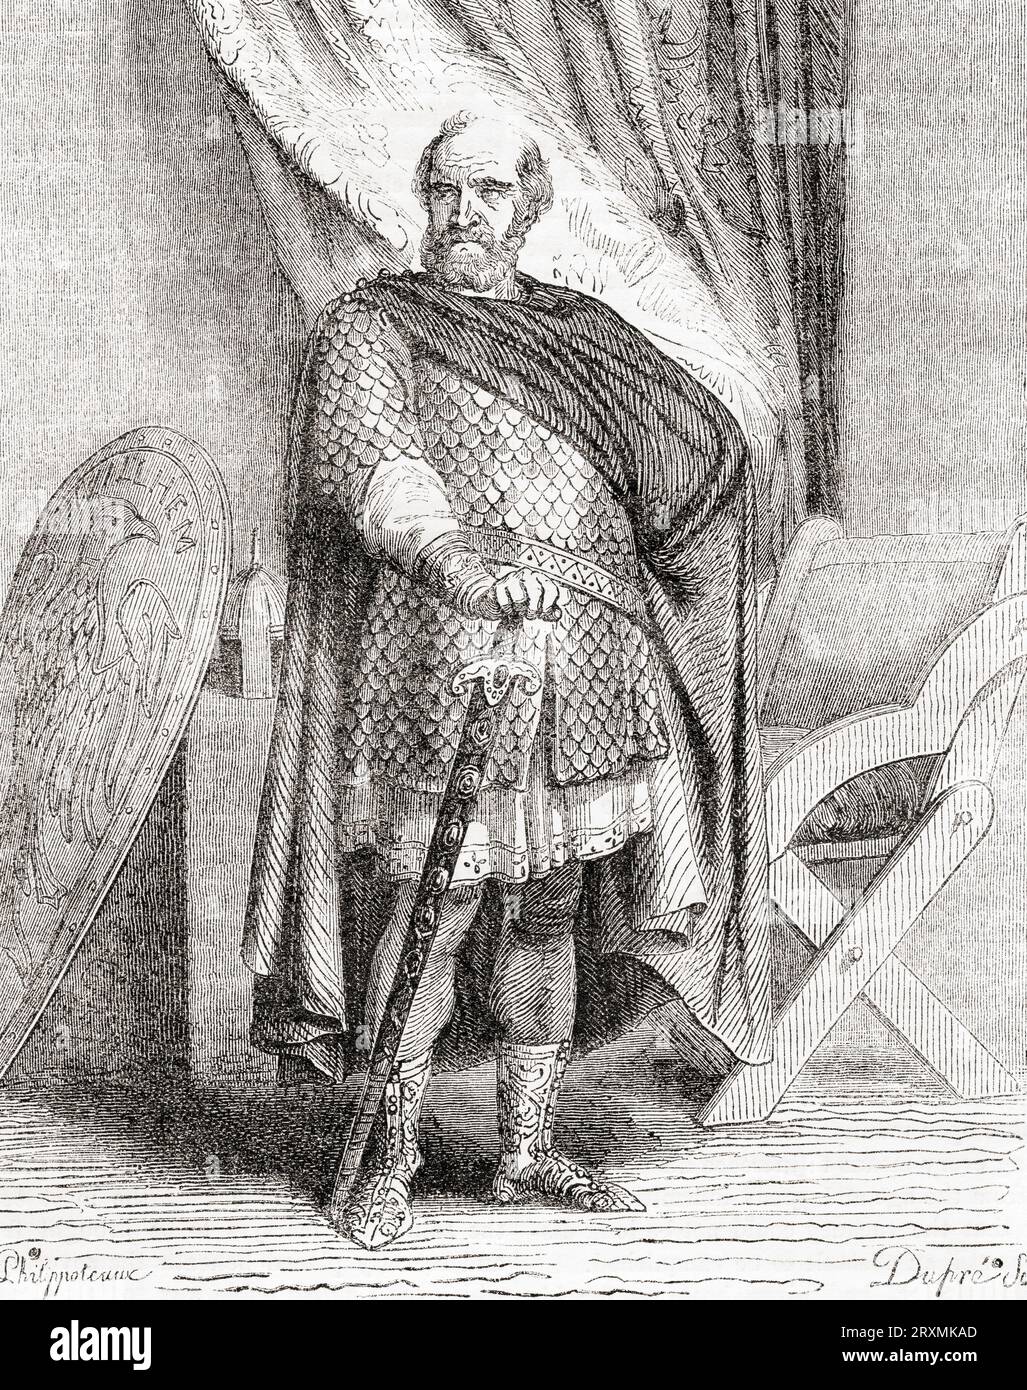 William I, c. 1028 – 1087, aka William the Conqueror and William the Bastard.  First Norman king of England, 1066 - 1087. A descendant of Rollo, he was Duke of Normandy.  From Cassell's Illustrated History of England, published 1857. Stock Photo